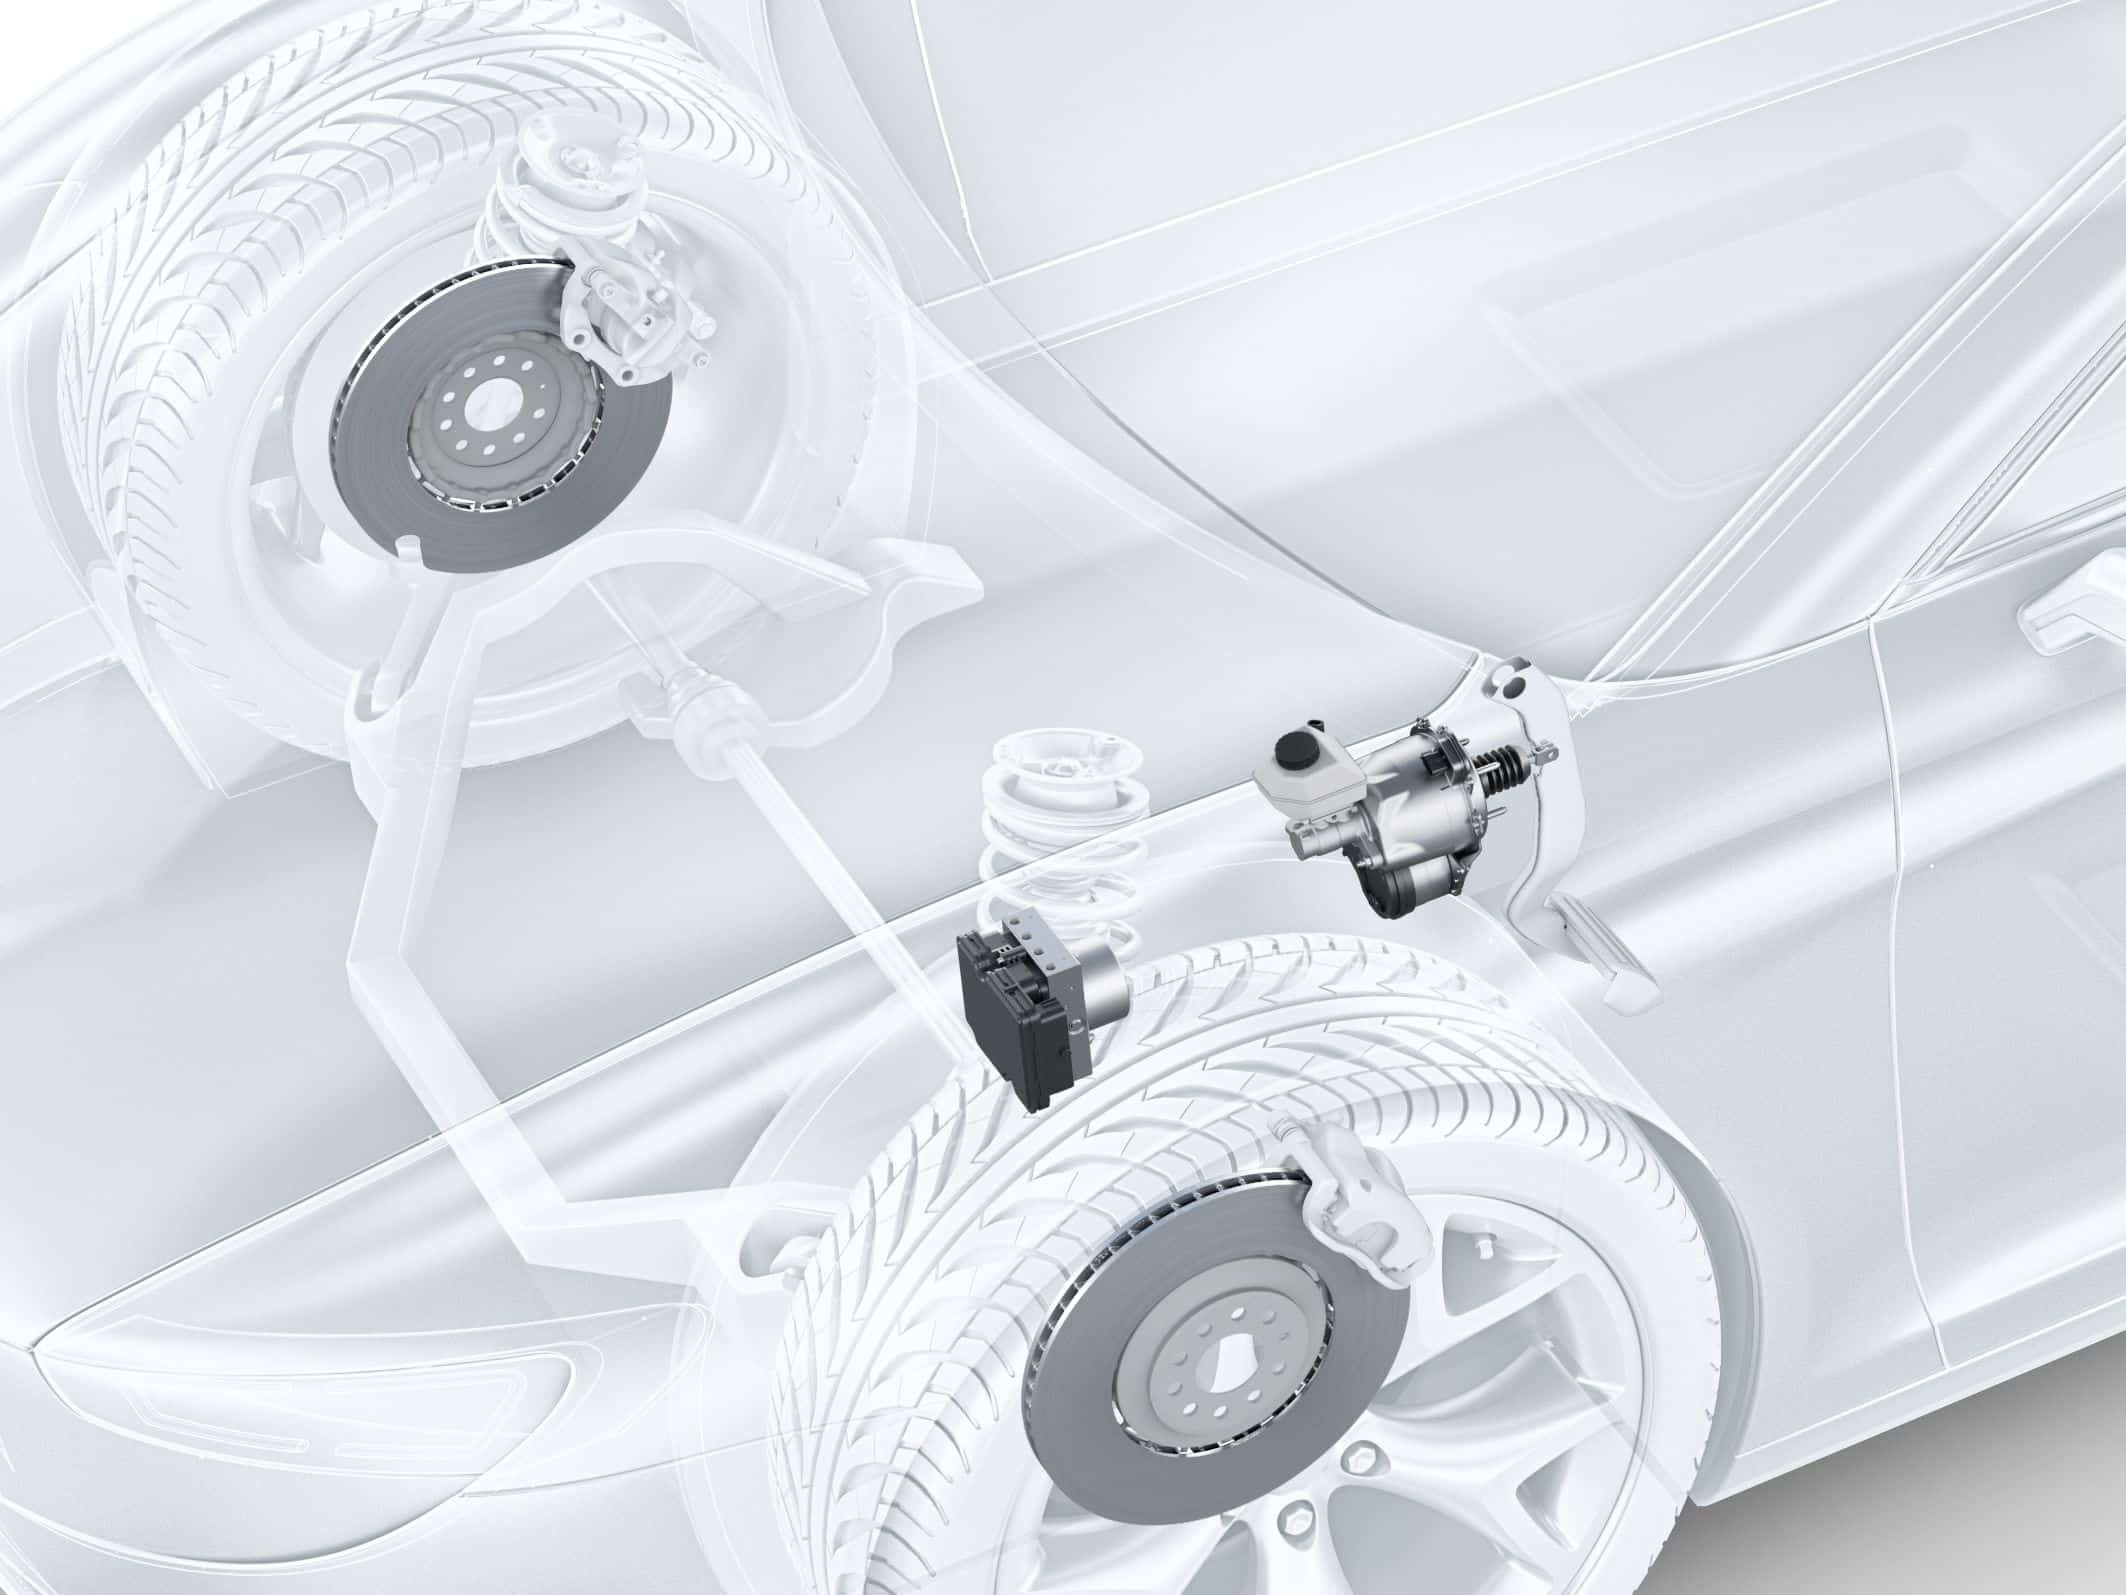 Bosch will show its latest braking and AV concepts at IAA Mobility 2023